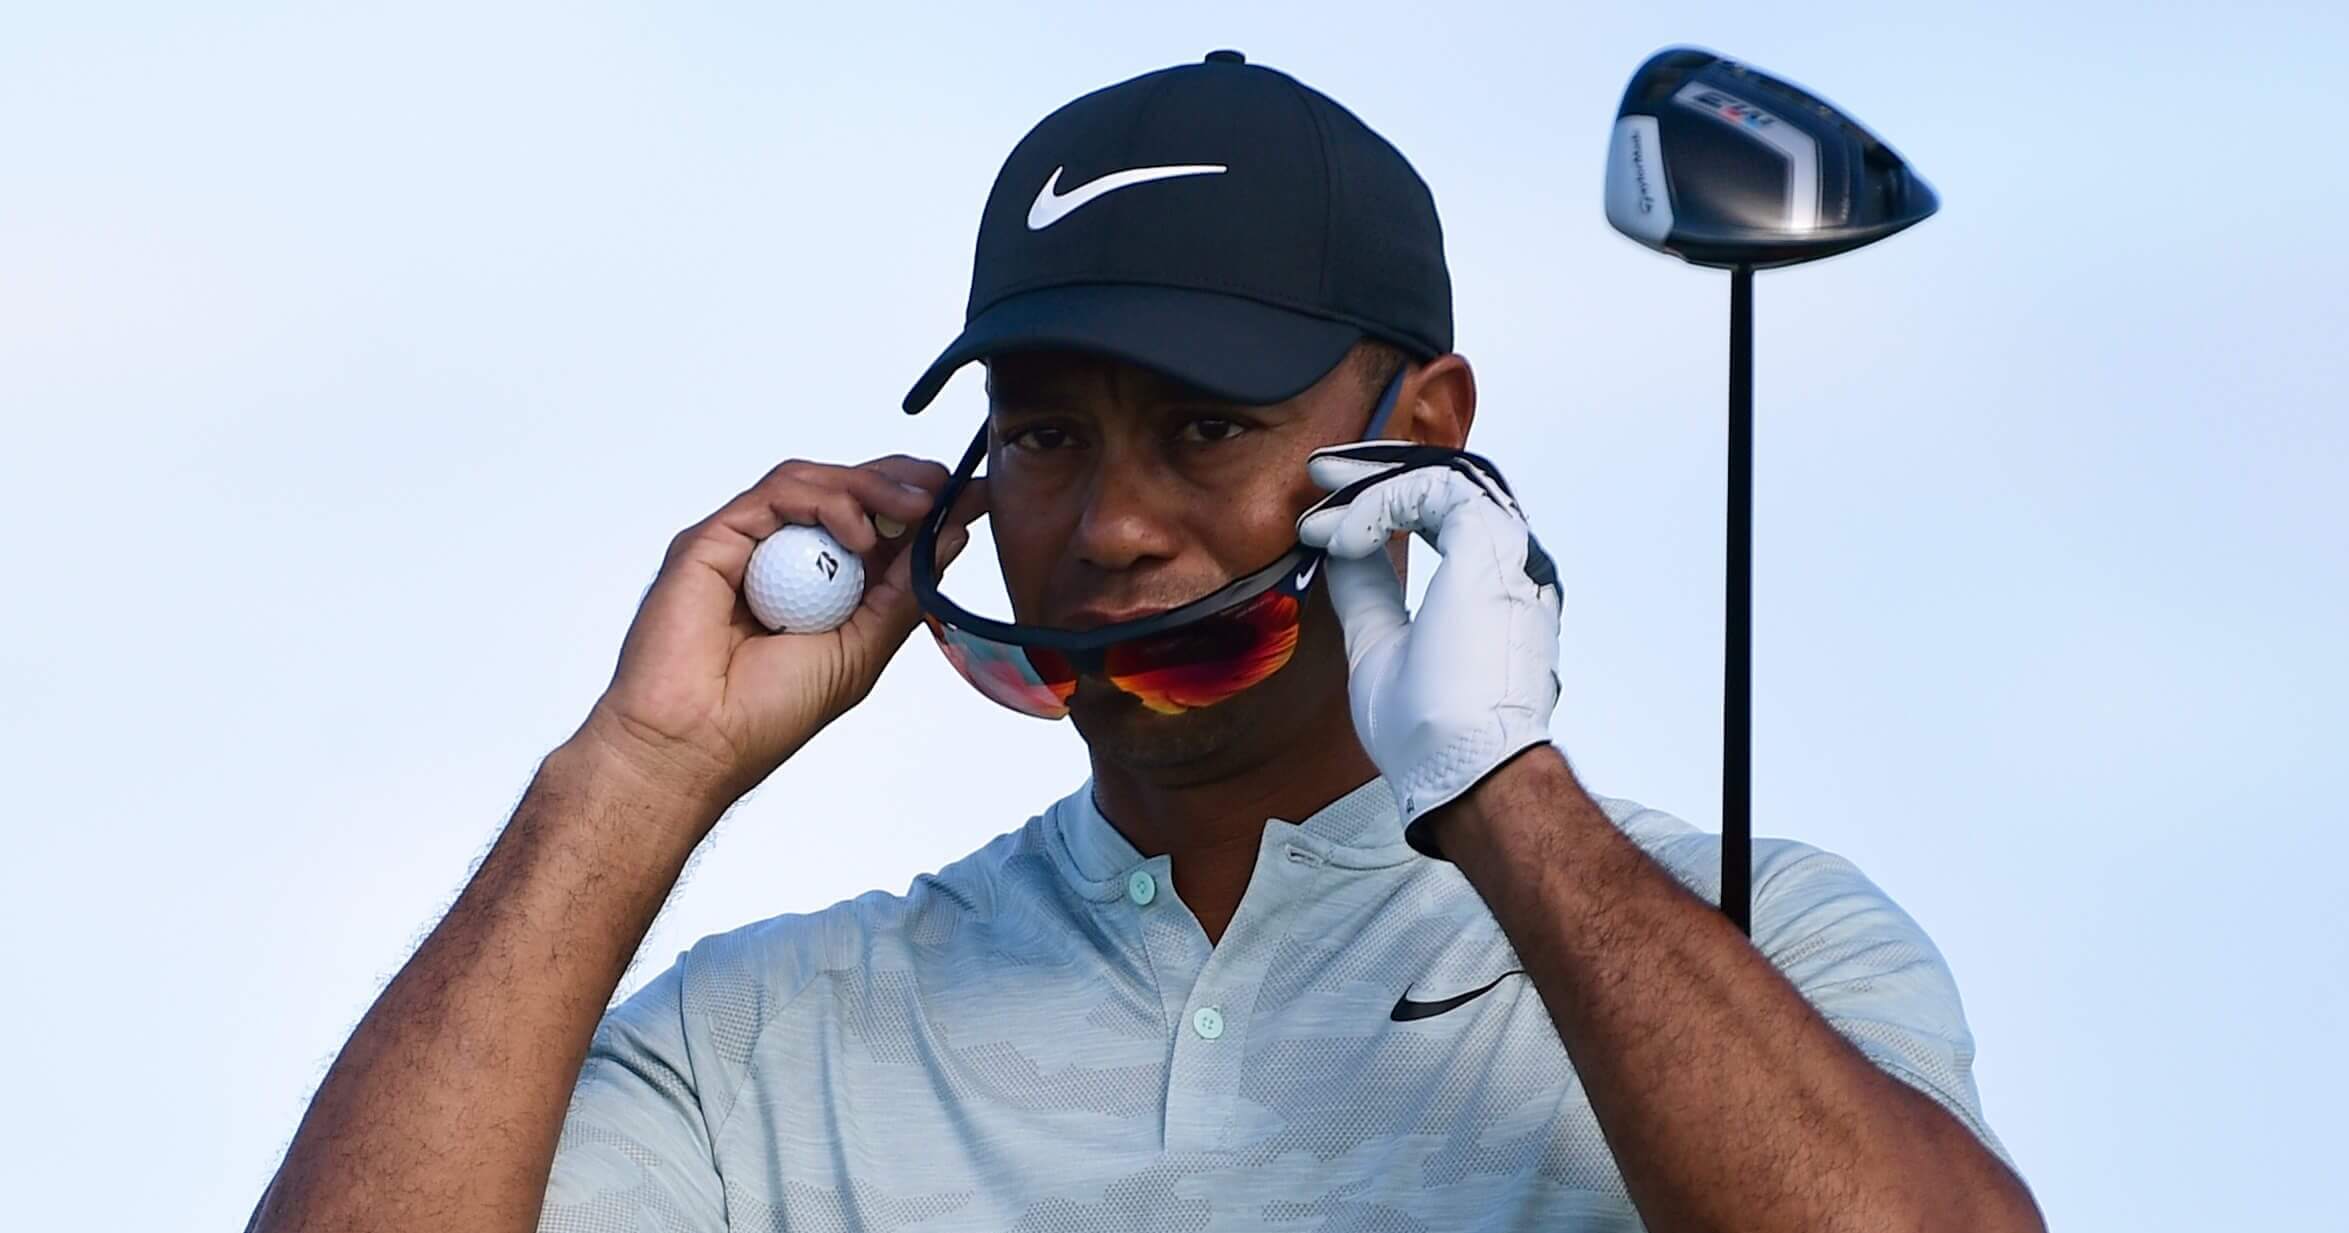 Tiger Woods adjusts his sunglasses before hitting from the seventh hole during the first round of the Hero World Challenge at the Albany Golf Club in Nassau, Bahamas on Thursday.